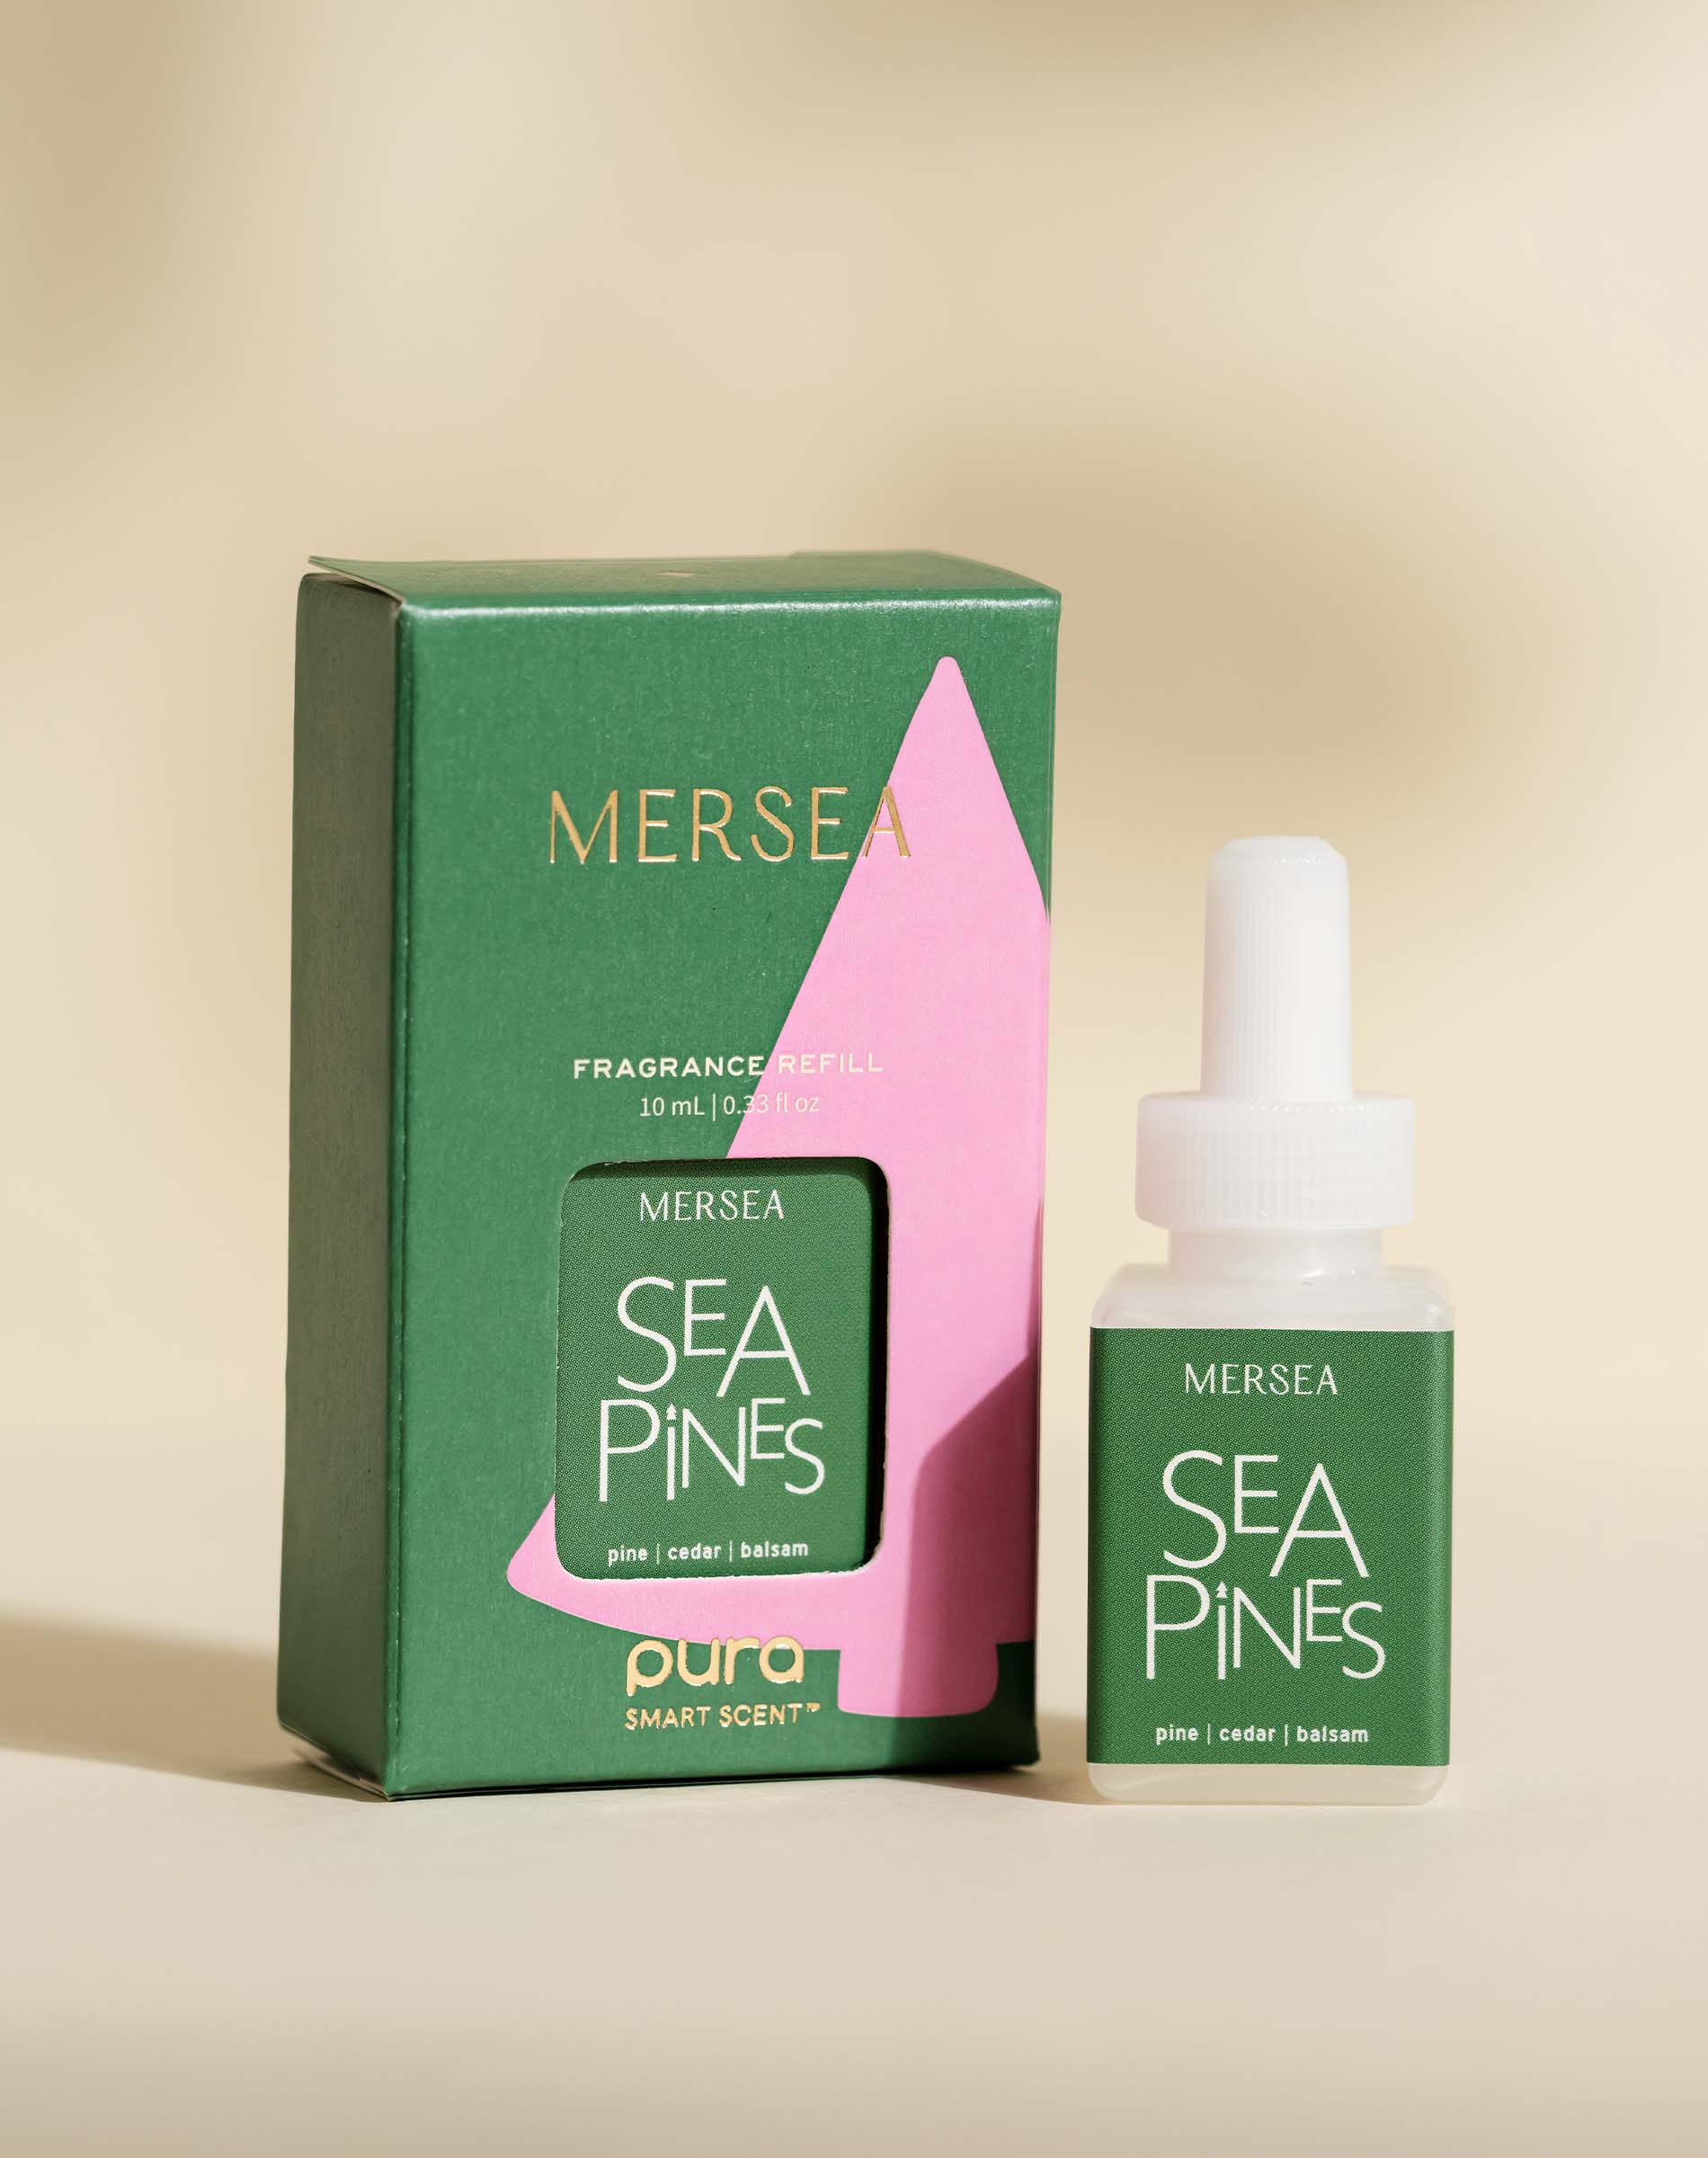 pura smart vial of mersea sea pines scent sitting next to boxed version of same product